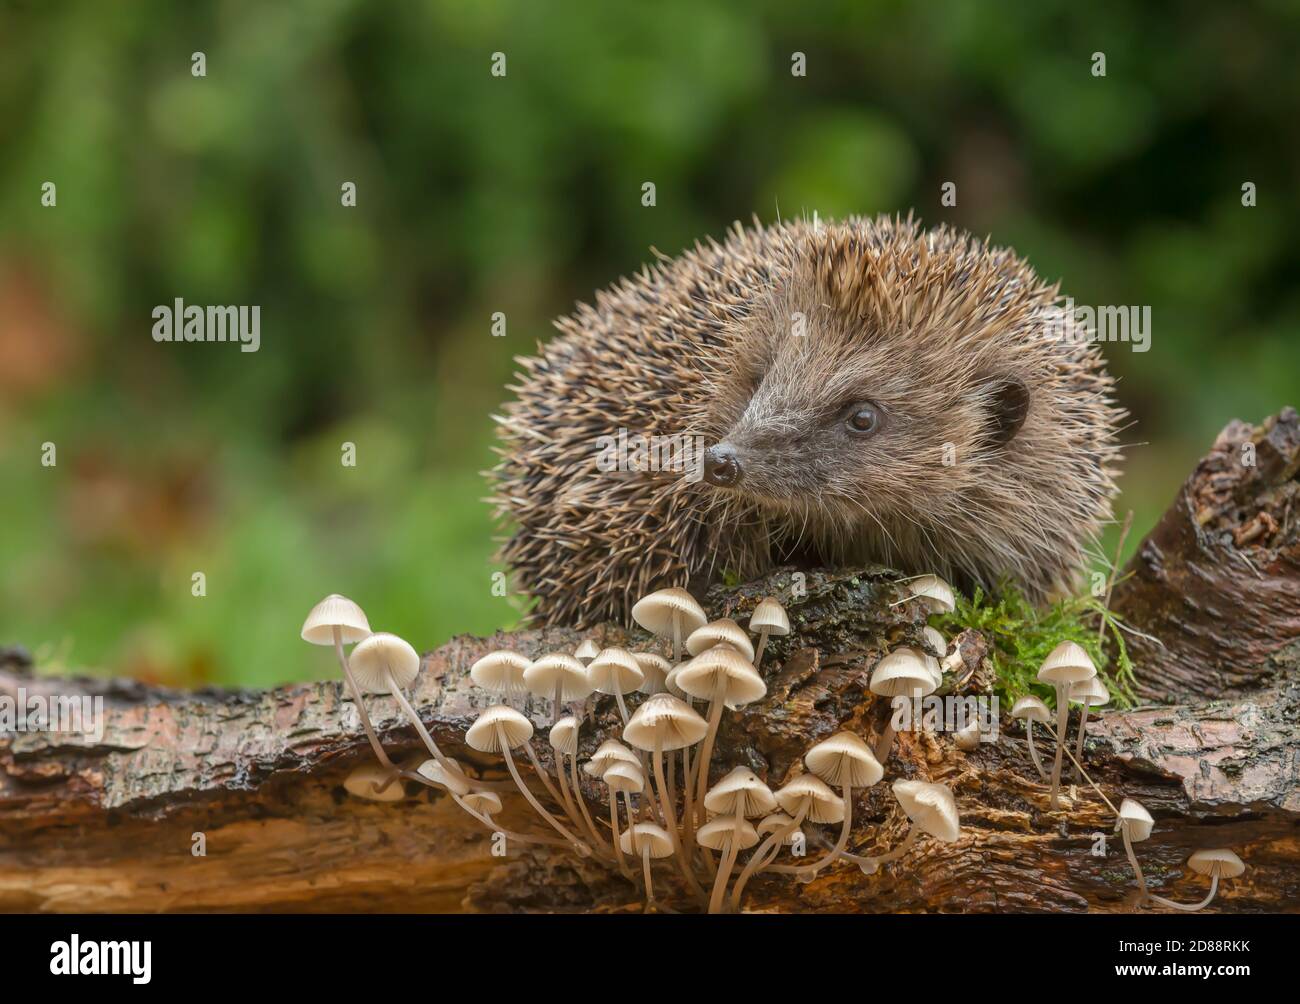 Hedgehog, (Scientific name: Erinaceus Europaeus) Wild, native, European hedgehog foraging on a log in autumn or fall with small, white toadstools. Stock Photo